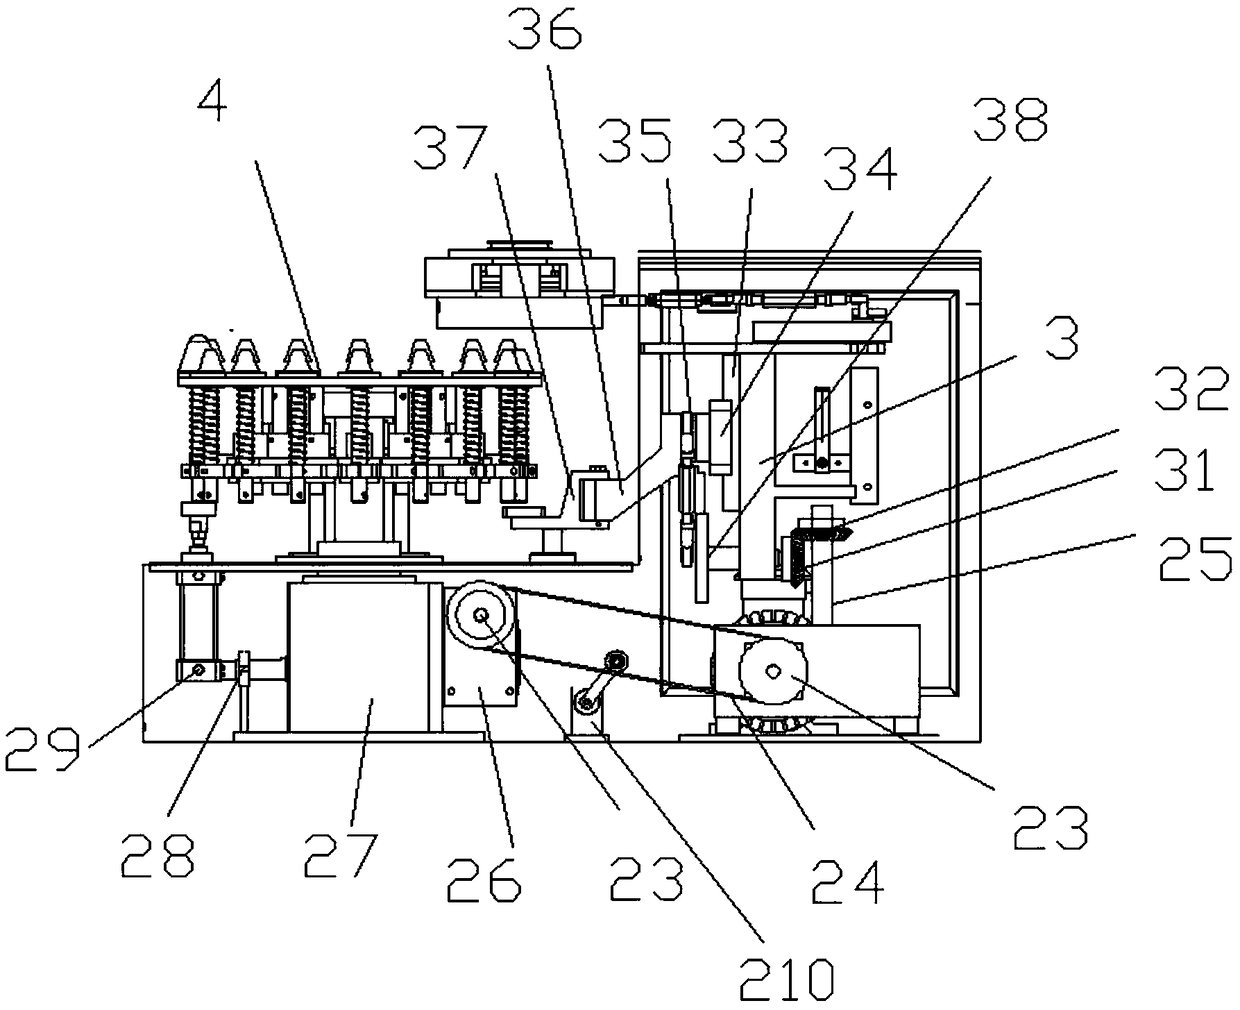 Rotary steamed corn bread processing and molding apparatus